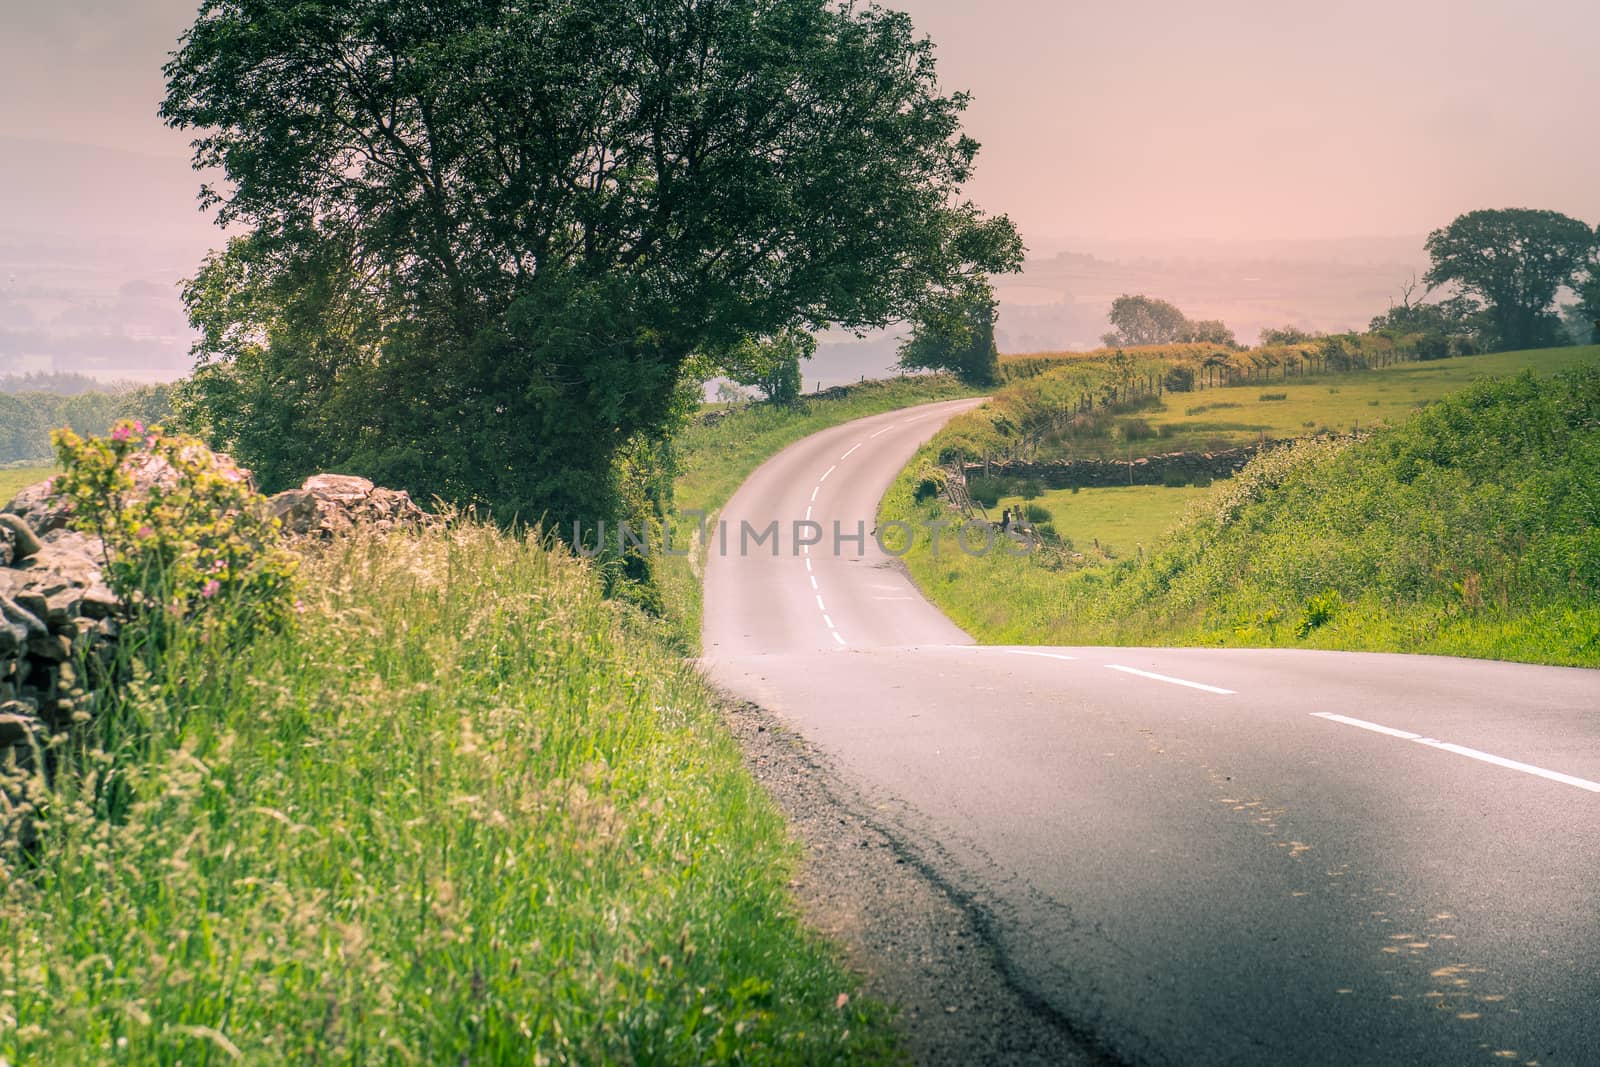 curved road in middle of rural Engalnd with dry stone walls